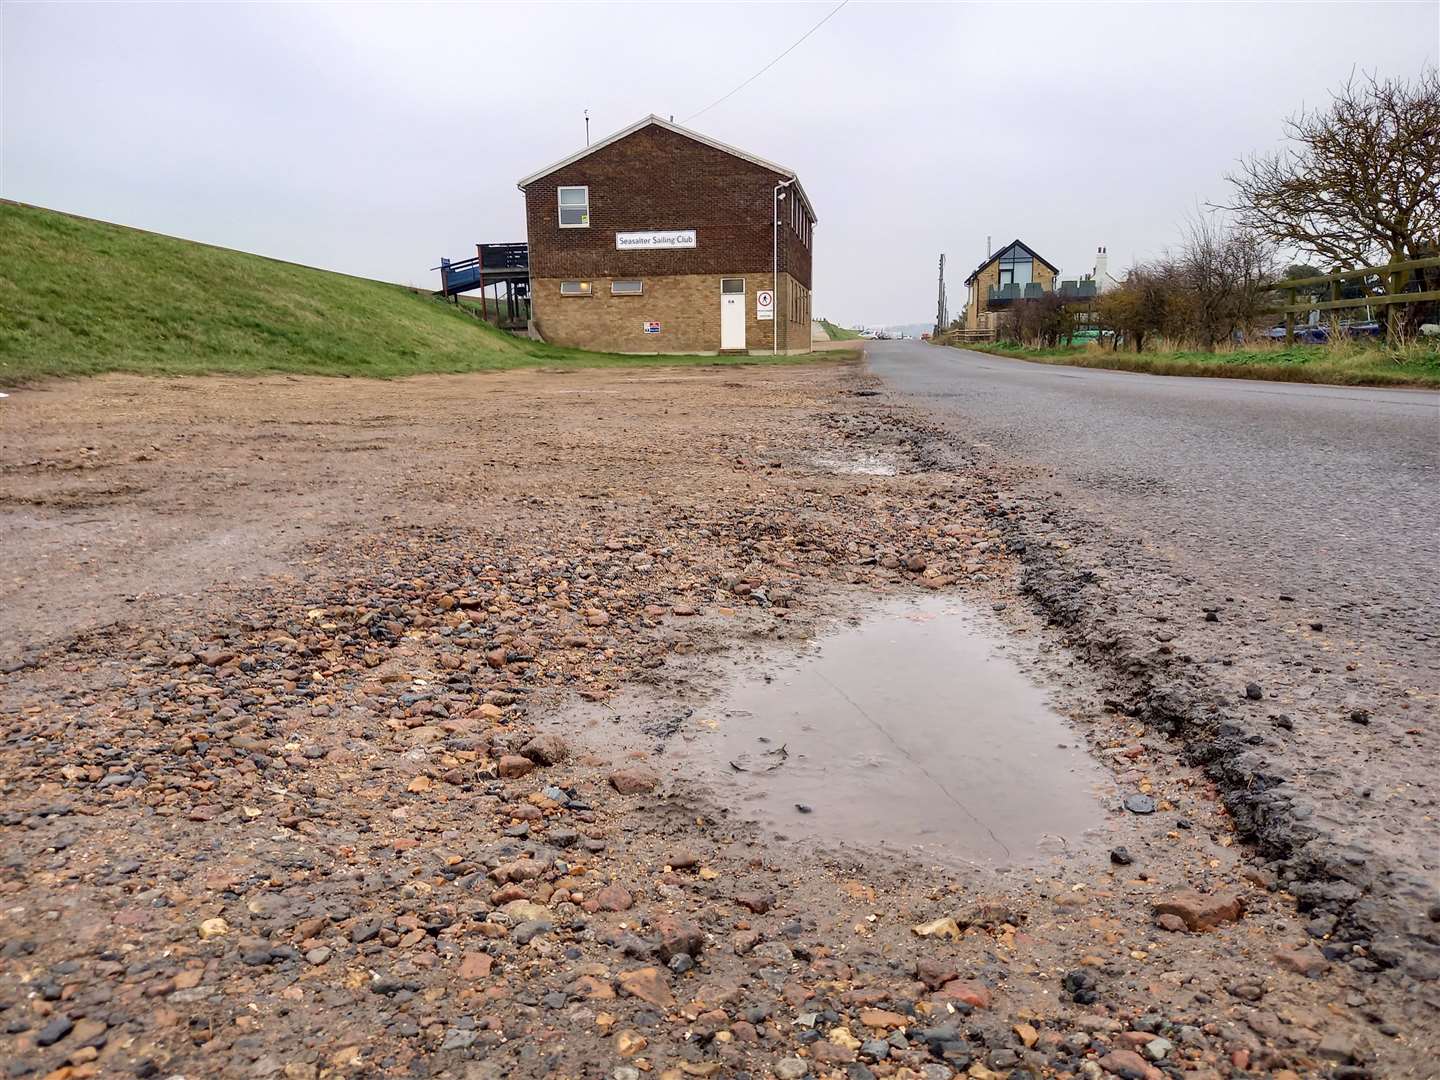 The car park is full of potholes and deep puddles